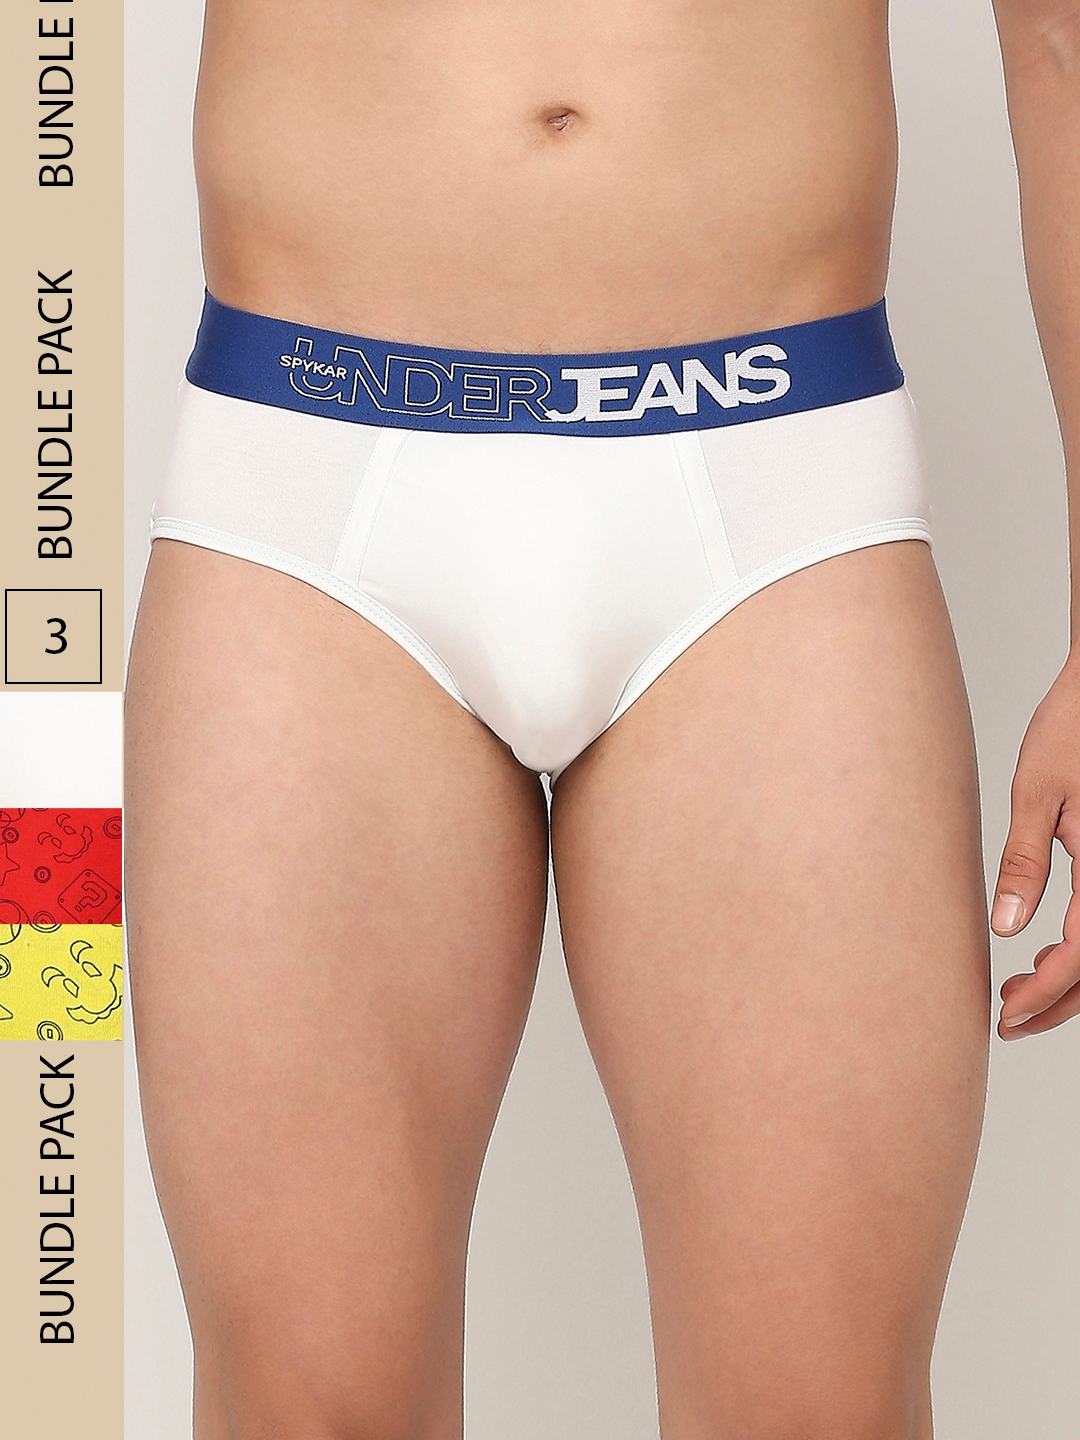 spykar | Underjeans by Spykar Premium Red Yellow & White Cotton Blend Printed Brief - Pack Of 3 0